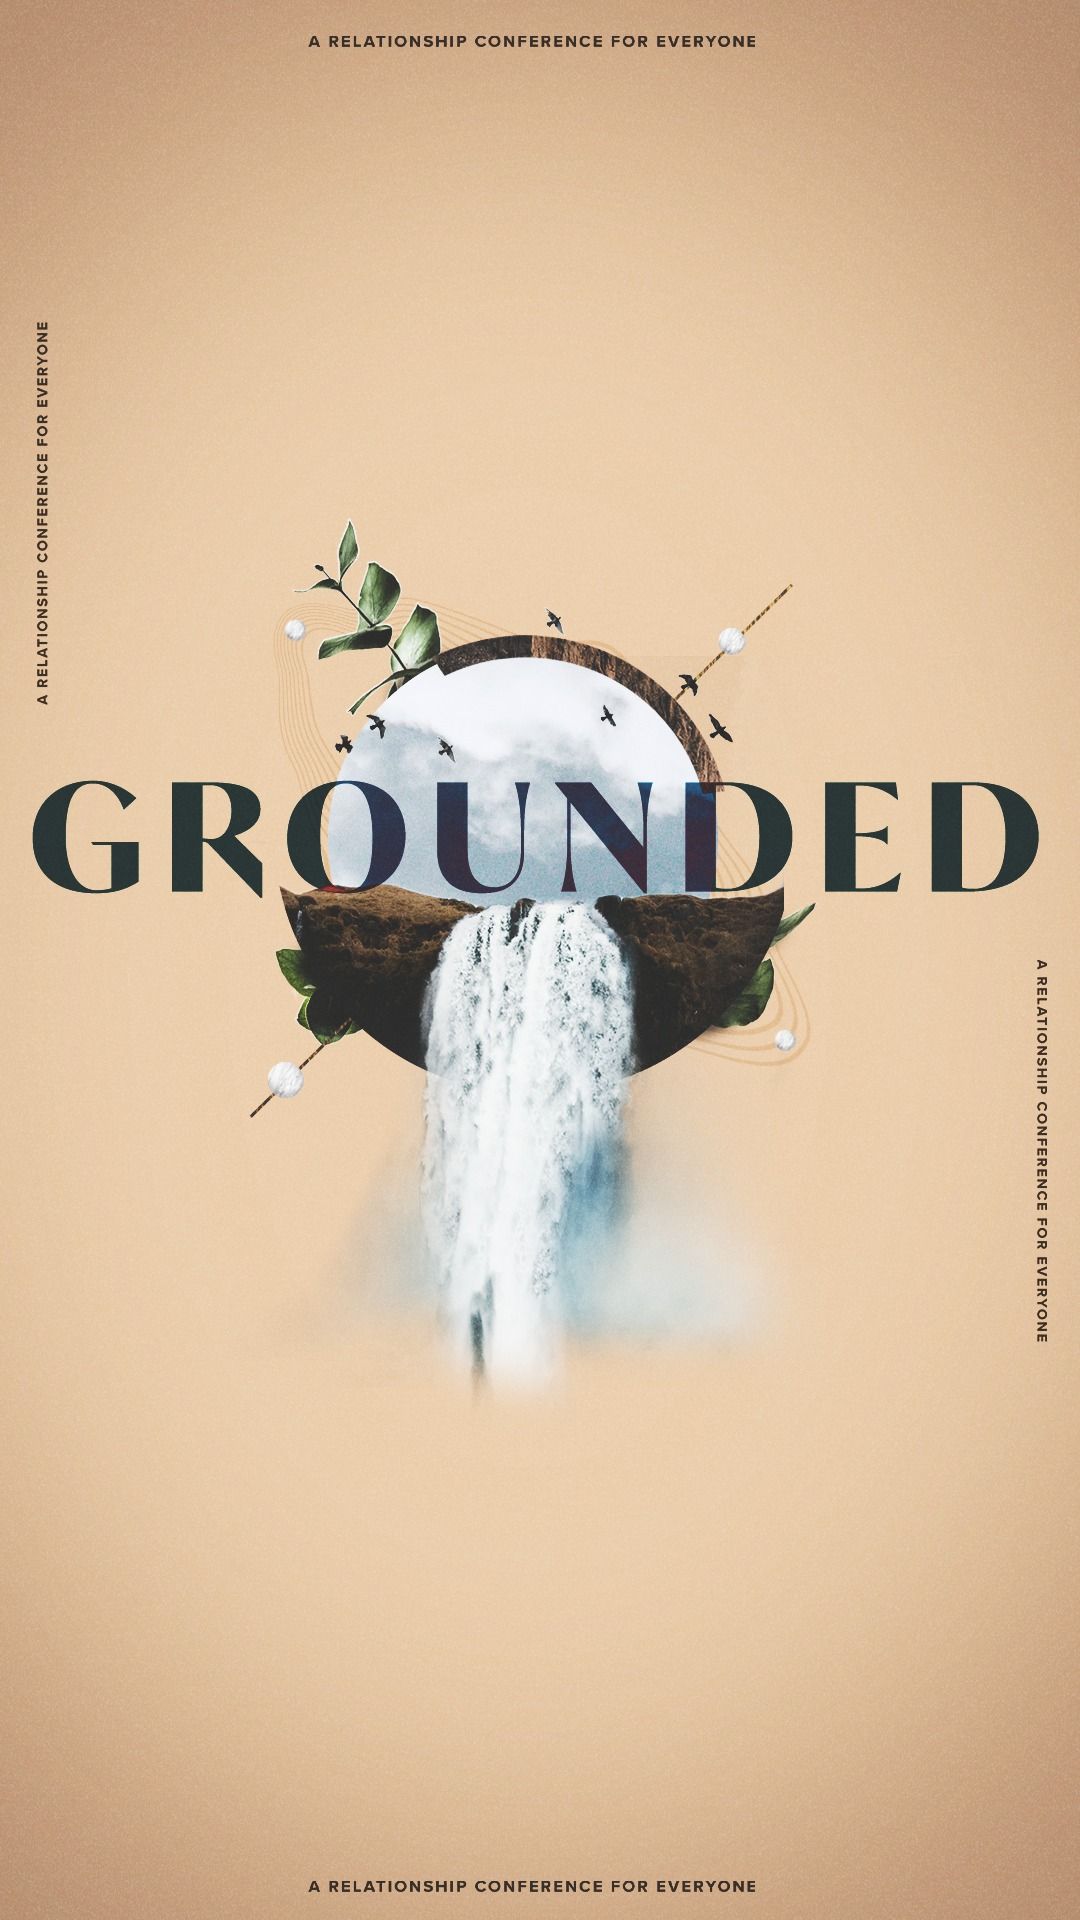 Grounded Conference